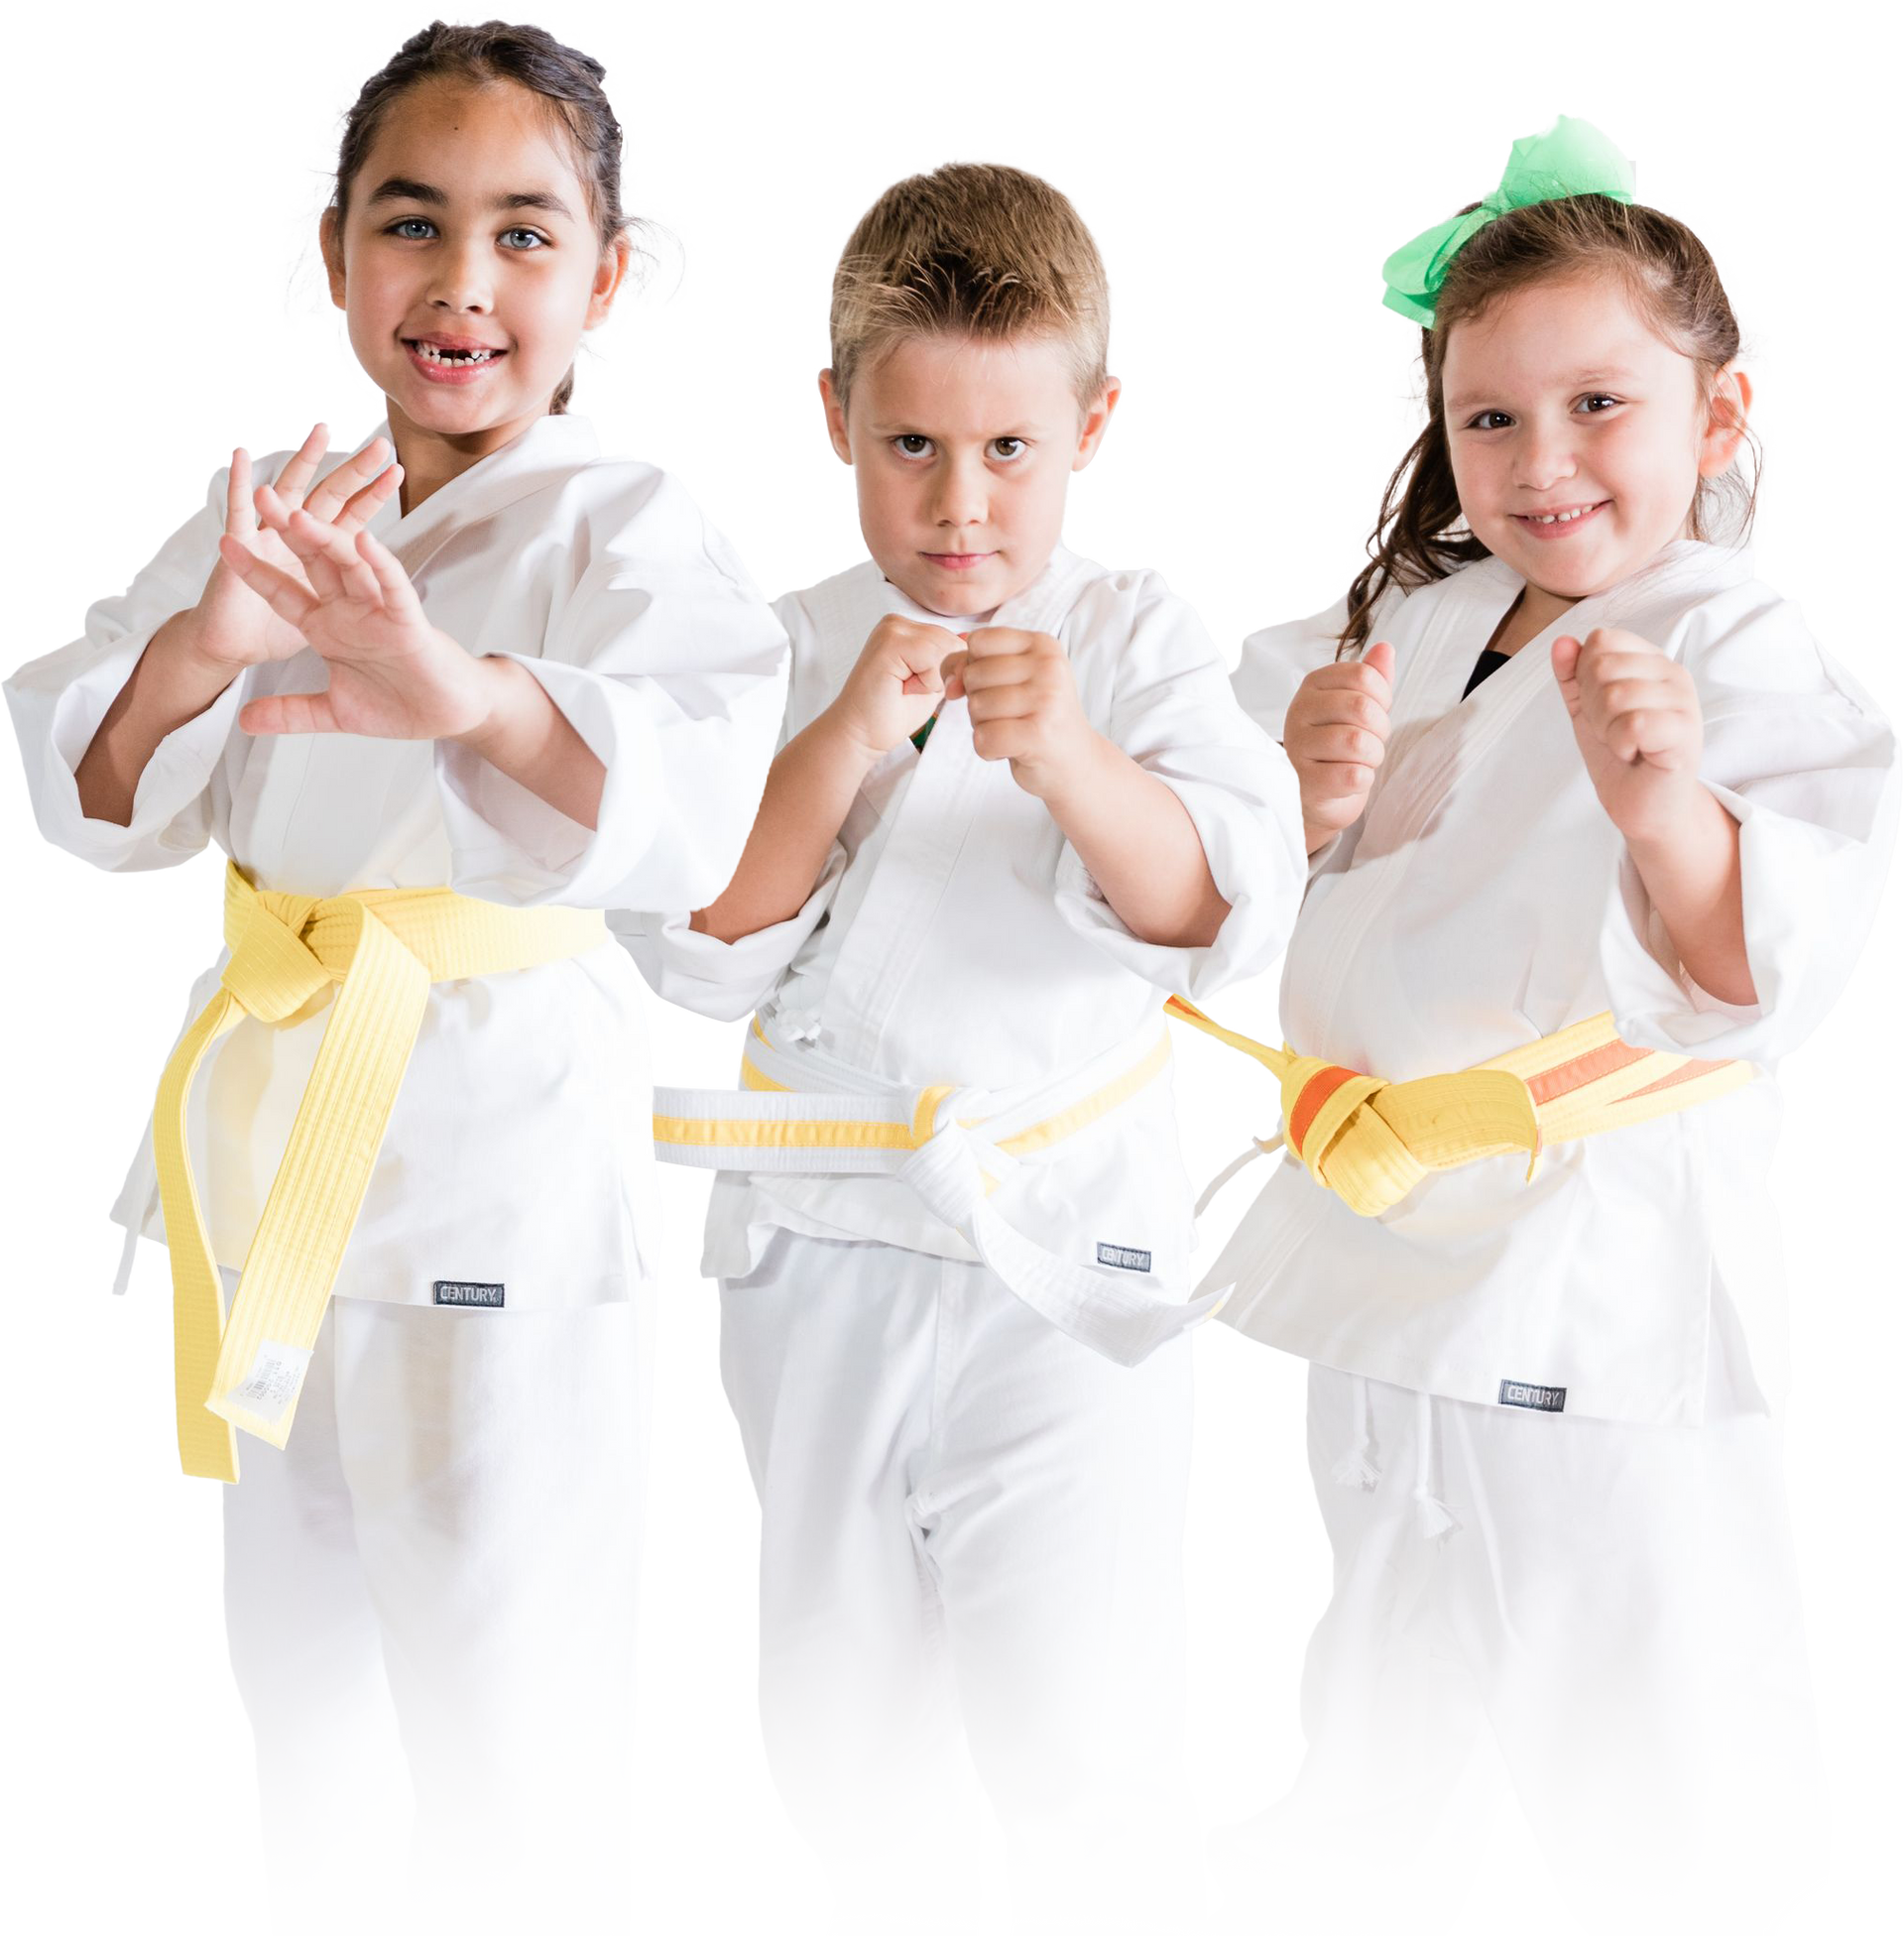 a boy and two girls are standing next to each other in karate uniforms .